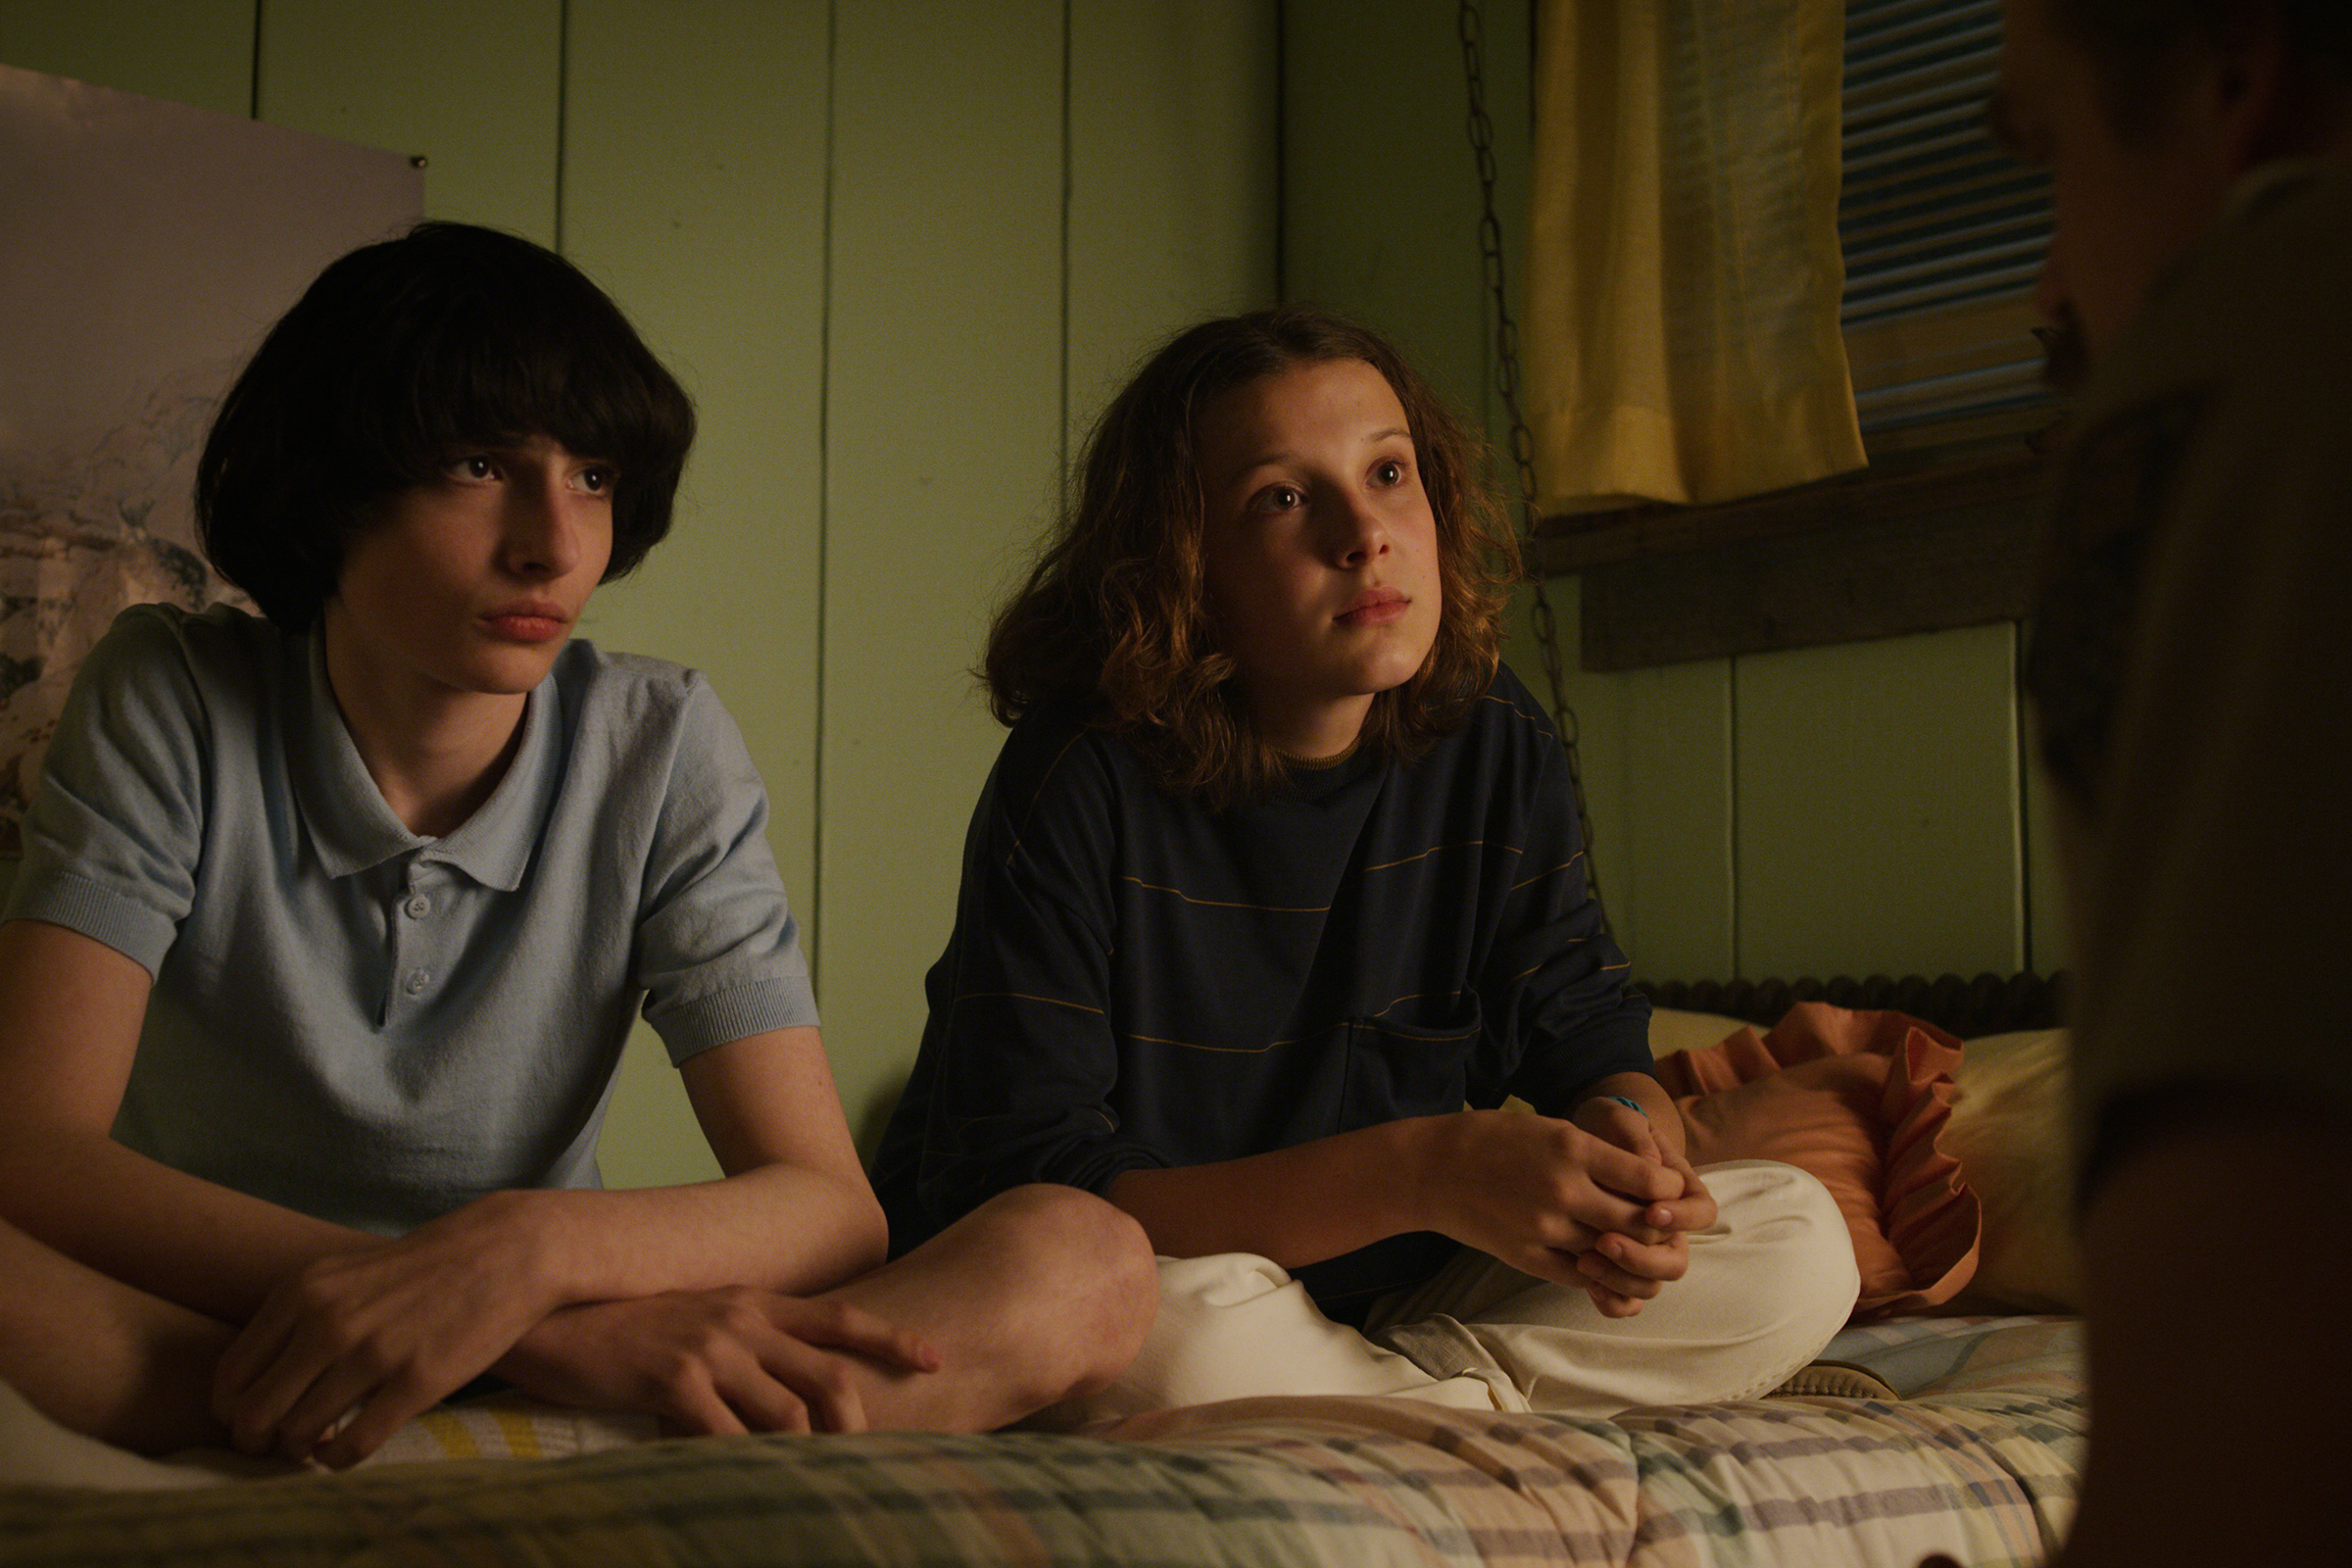 Answering the questions about Stranger Things season 3